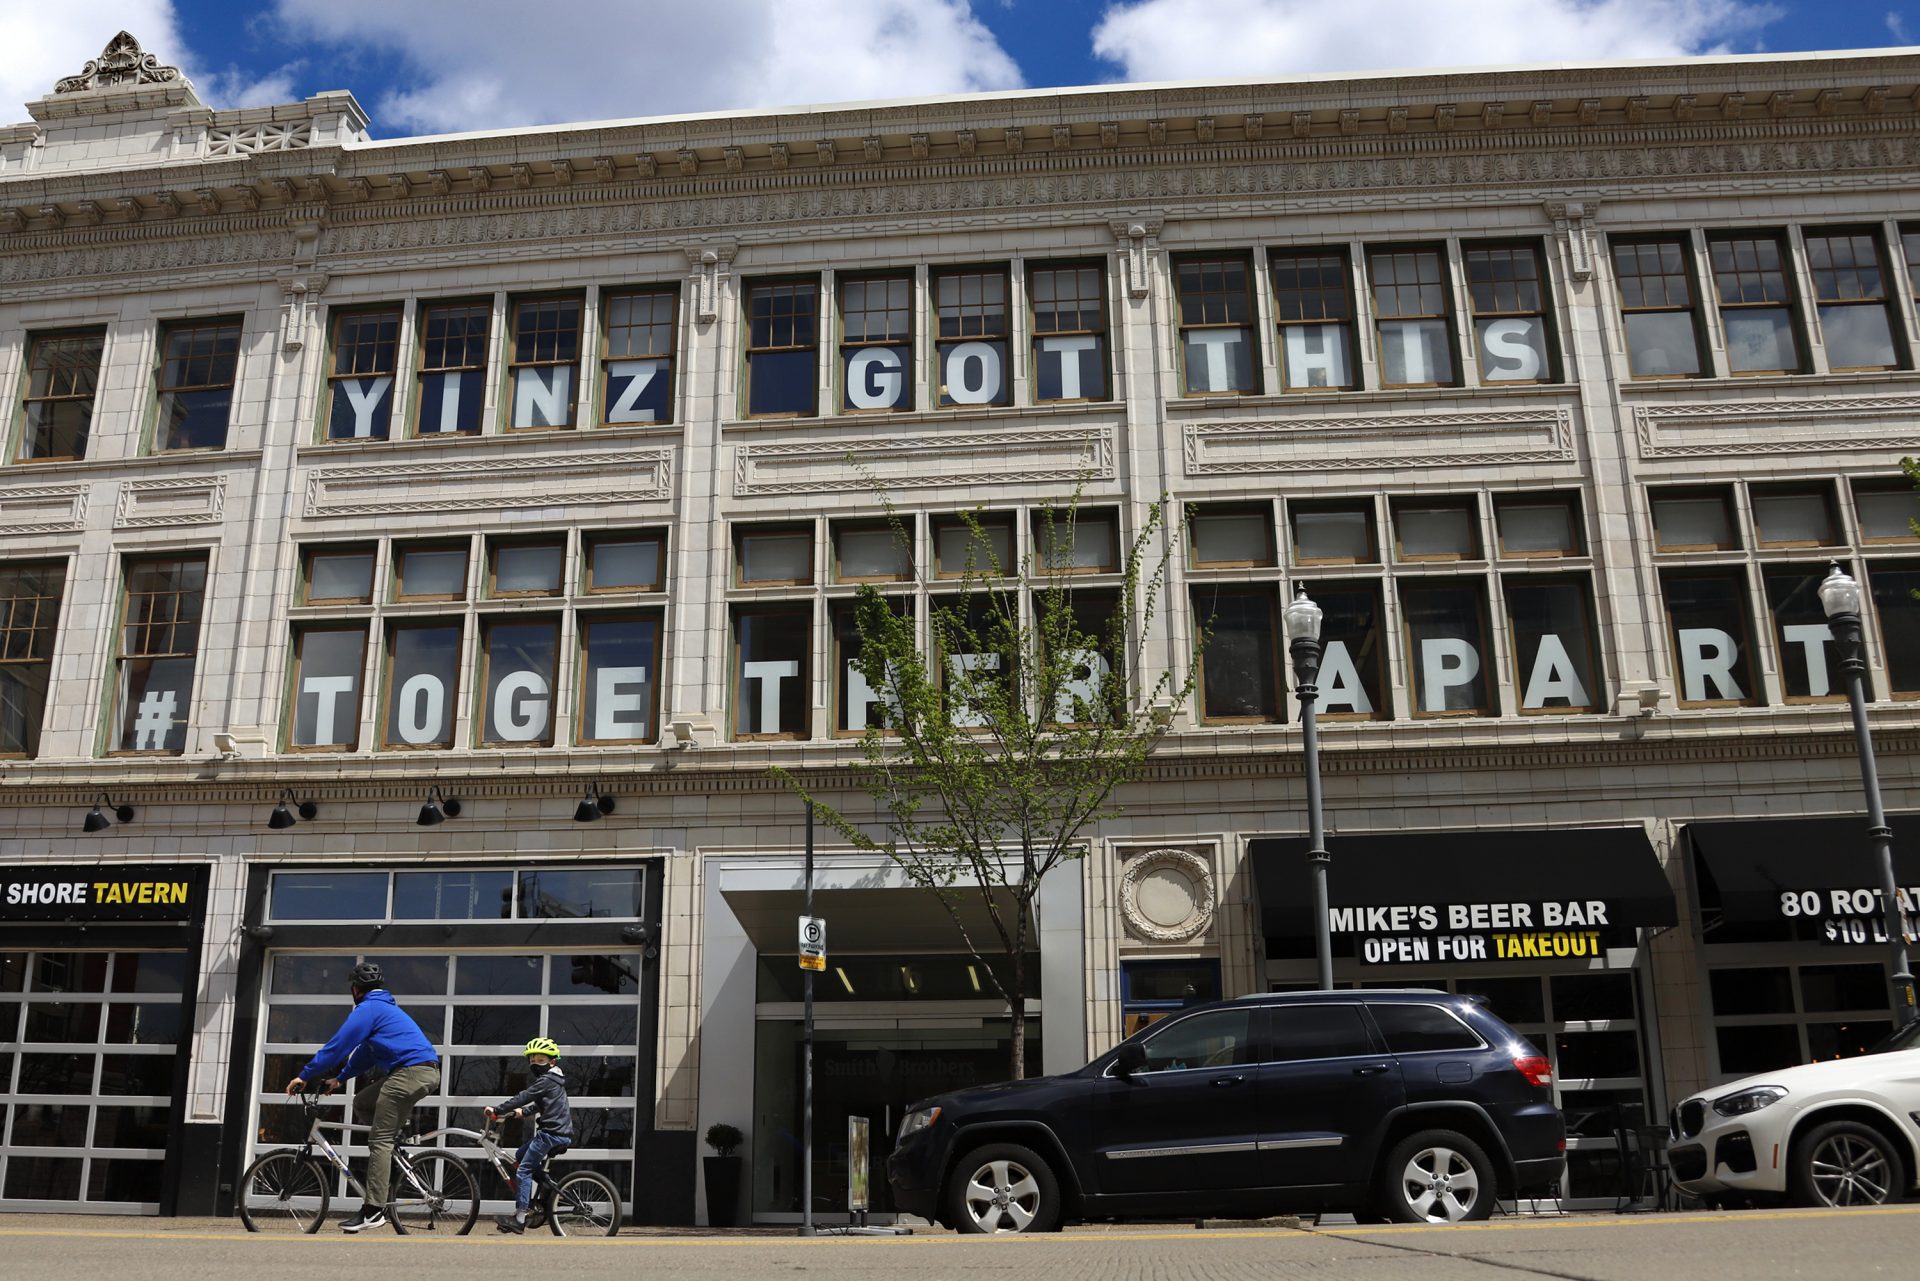 A father and son ride their bikes past a building on the Northside of Pittsburgh that sports a sign of encouragement for the efforts being made to mitigate the spread of COVID-19, Wednesday, April 15, 2020.